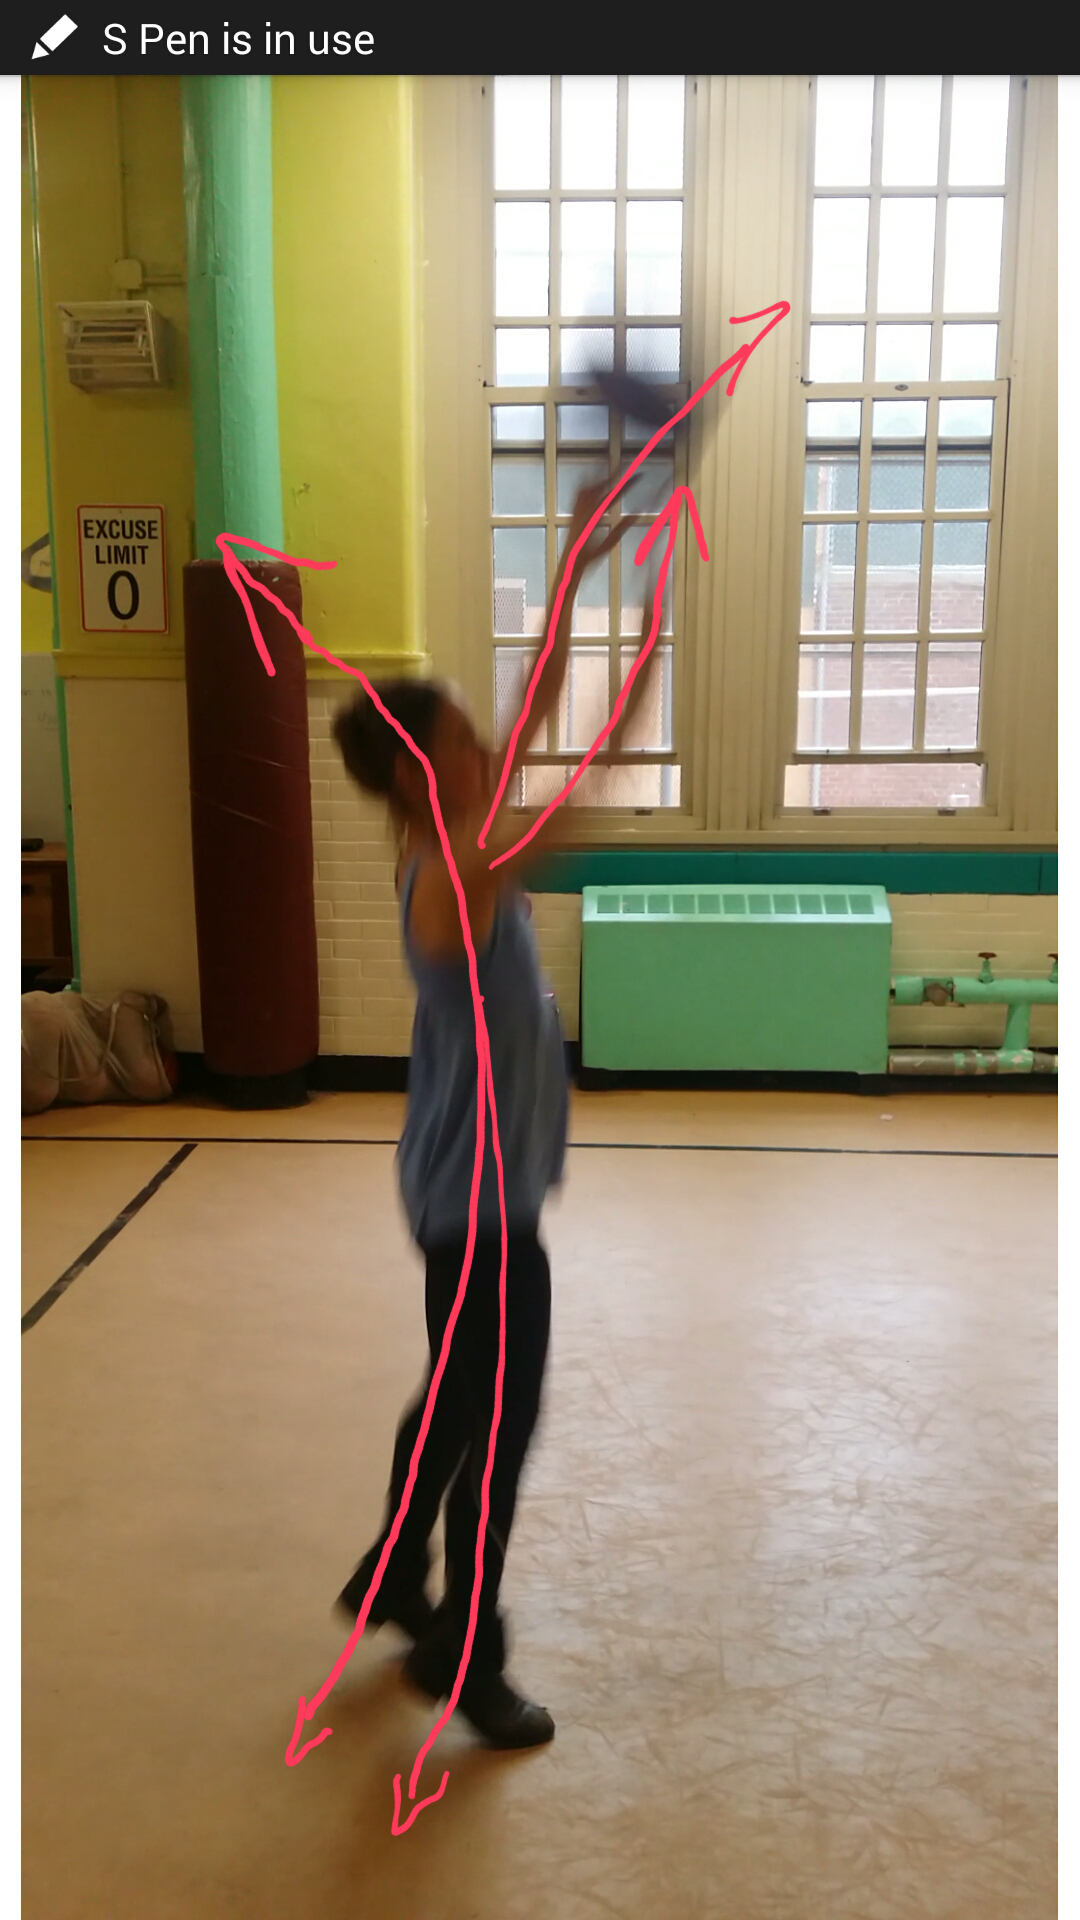 Exhibit B: poor shooting form, power of jump lessened by backwards pulls, arms not working together. 